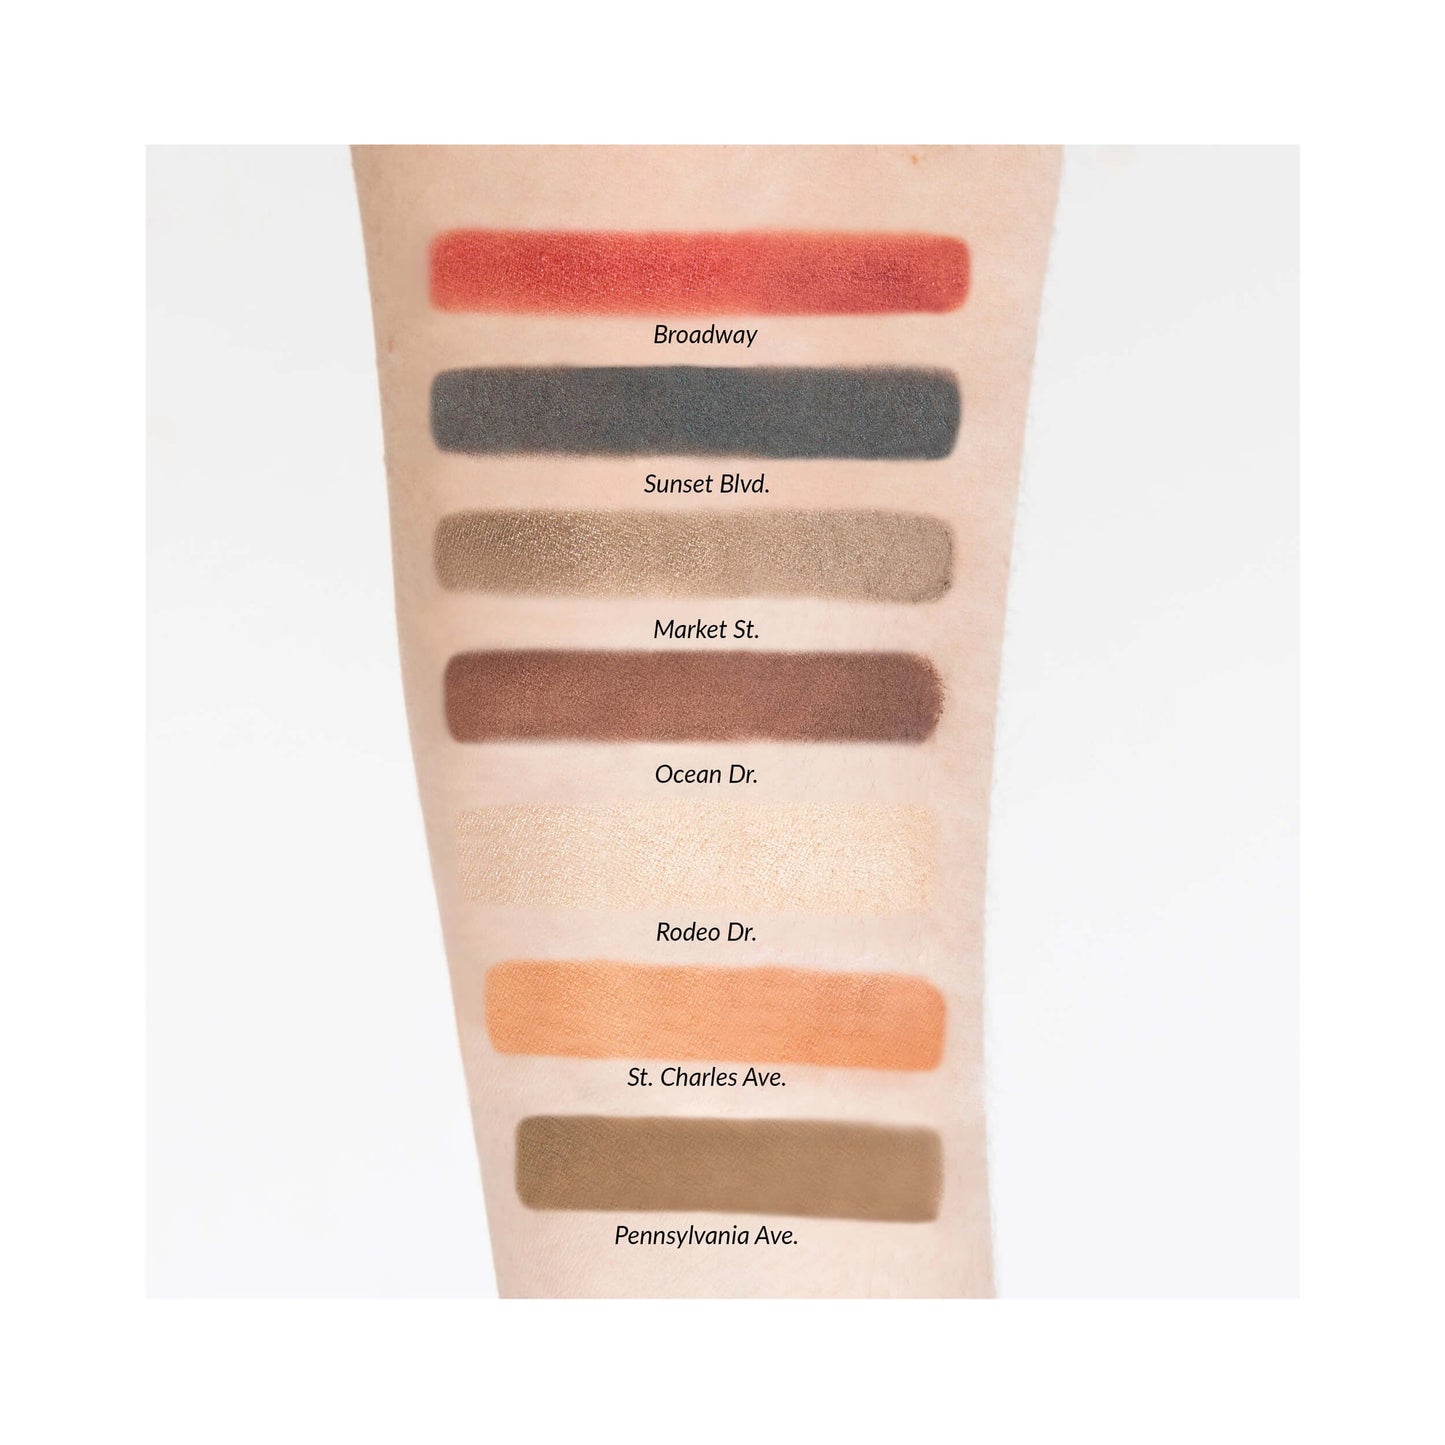 theBalm Autobalm PIC PERF Shadows on the Go Swatches